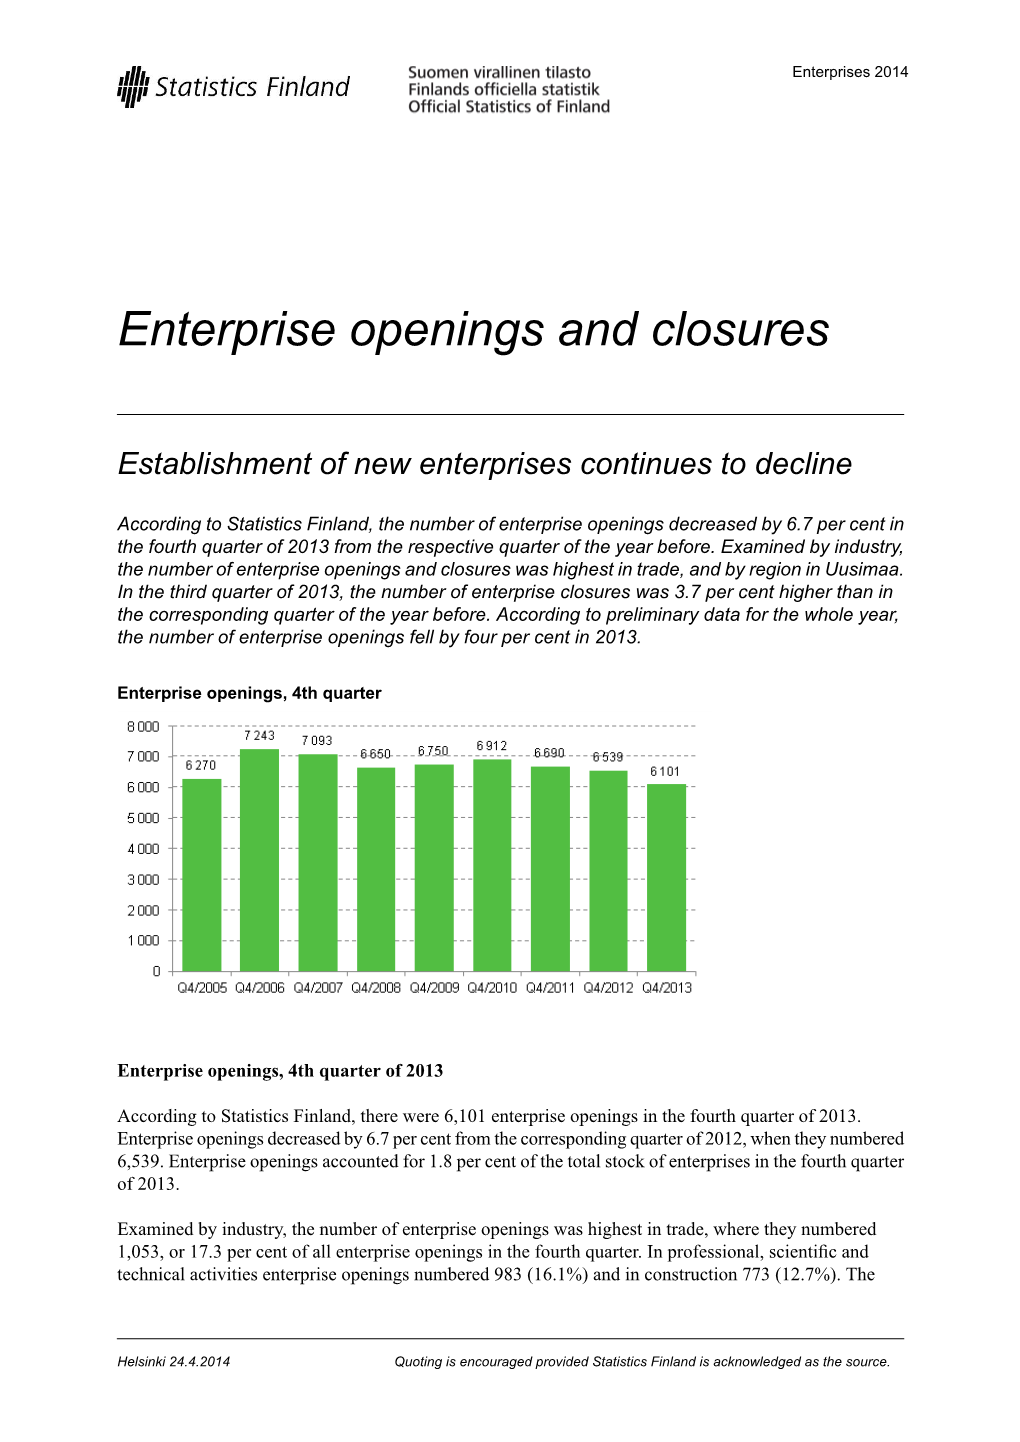 Enterprise Openings and Closures